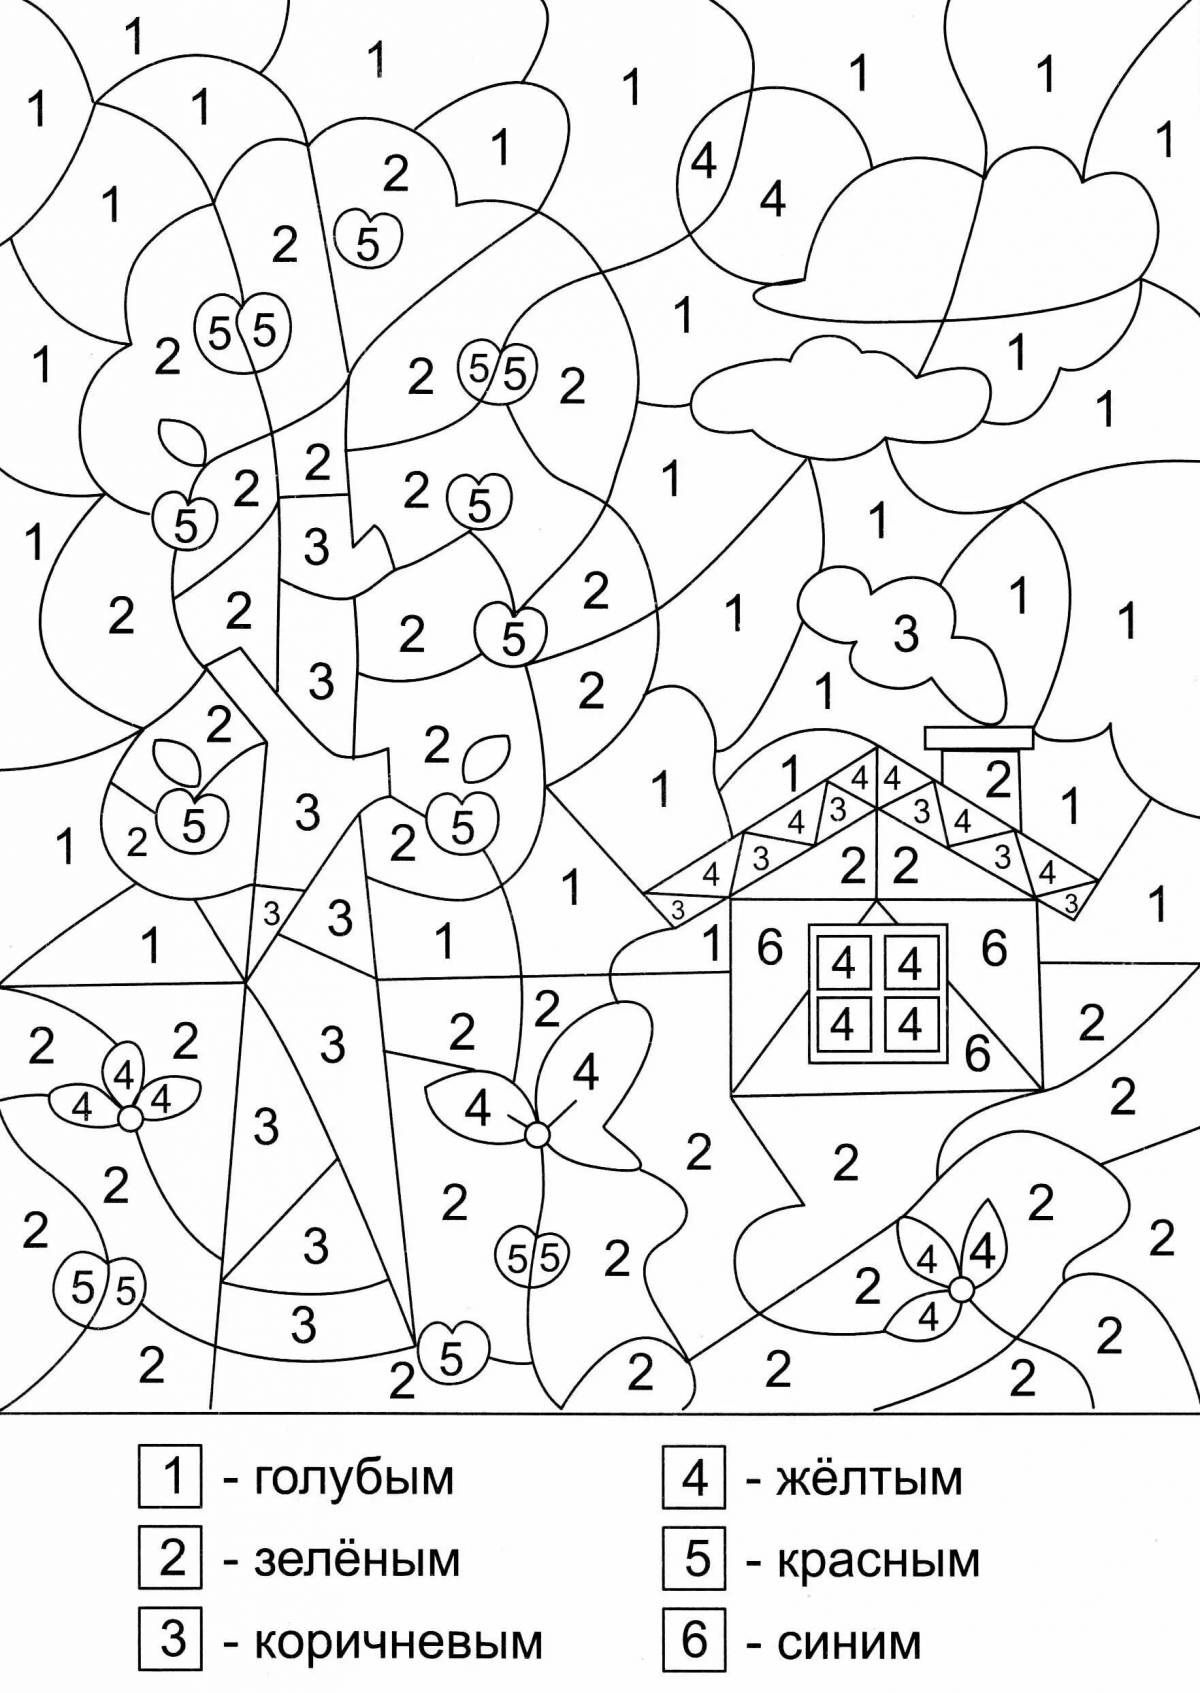 Charming coloring book math by numbers